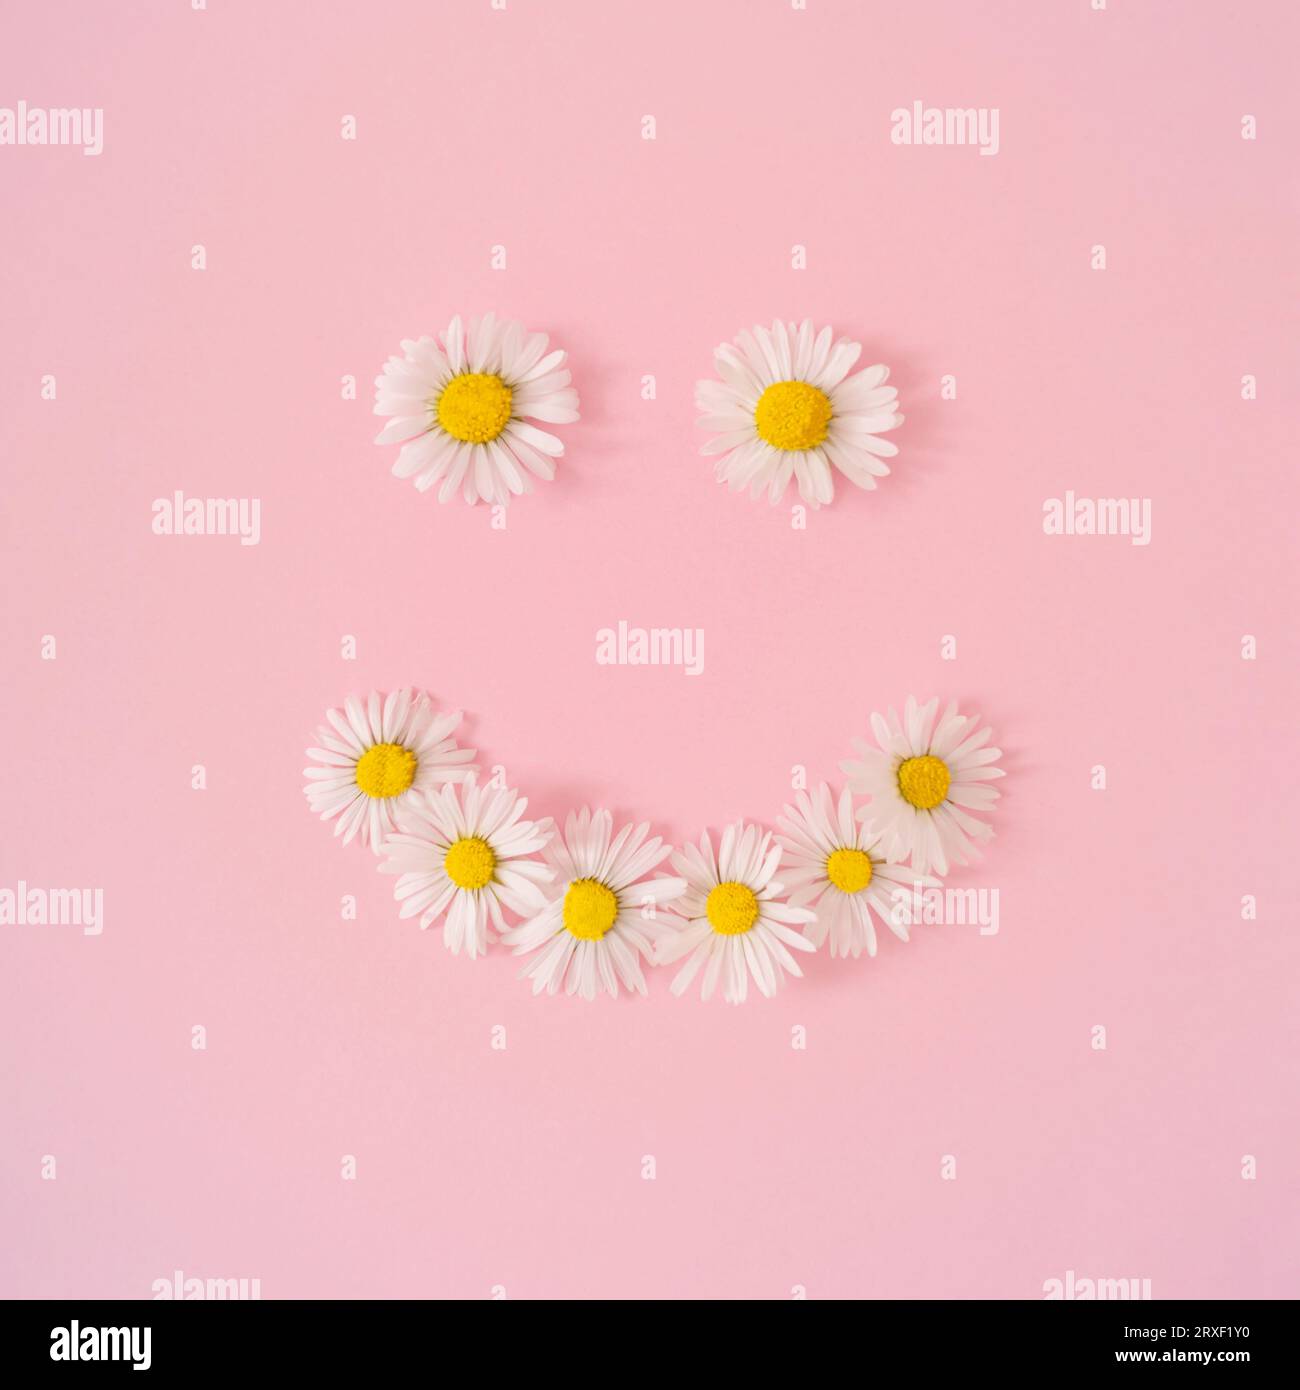 https://c8.alamy.com/comp/2RXF1Y0/smiley-made-of-summer-daisy-flowers-on-pastel-pink-background-minimal-creative-composition-flat-lay-concept-top-of-view-2RXF1Y0.jpg